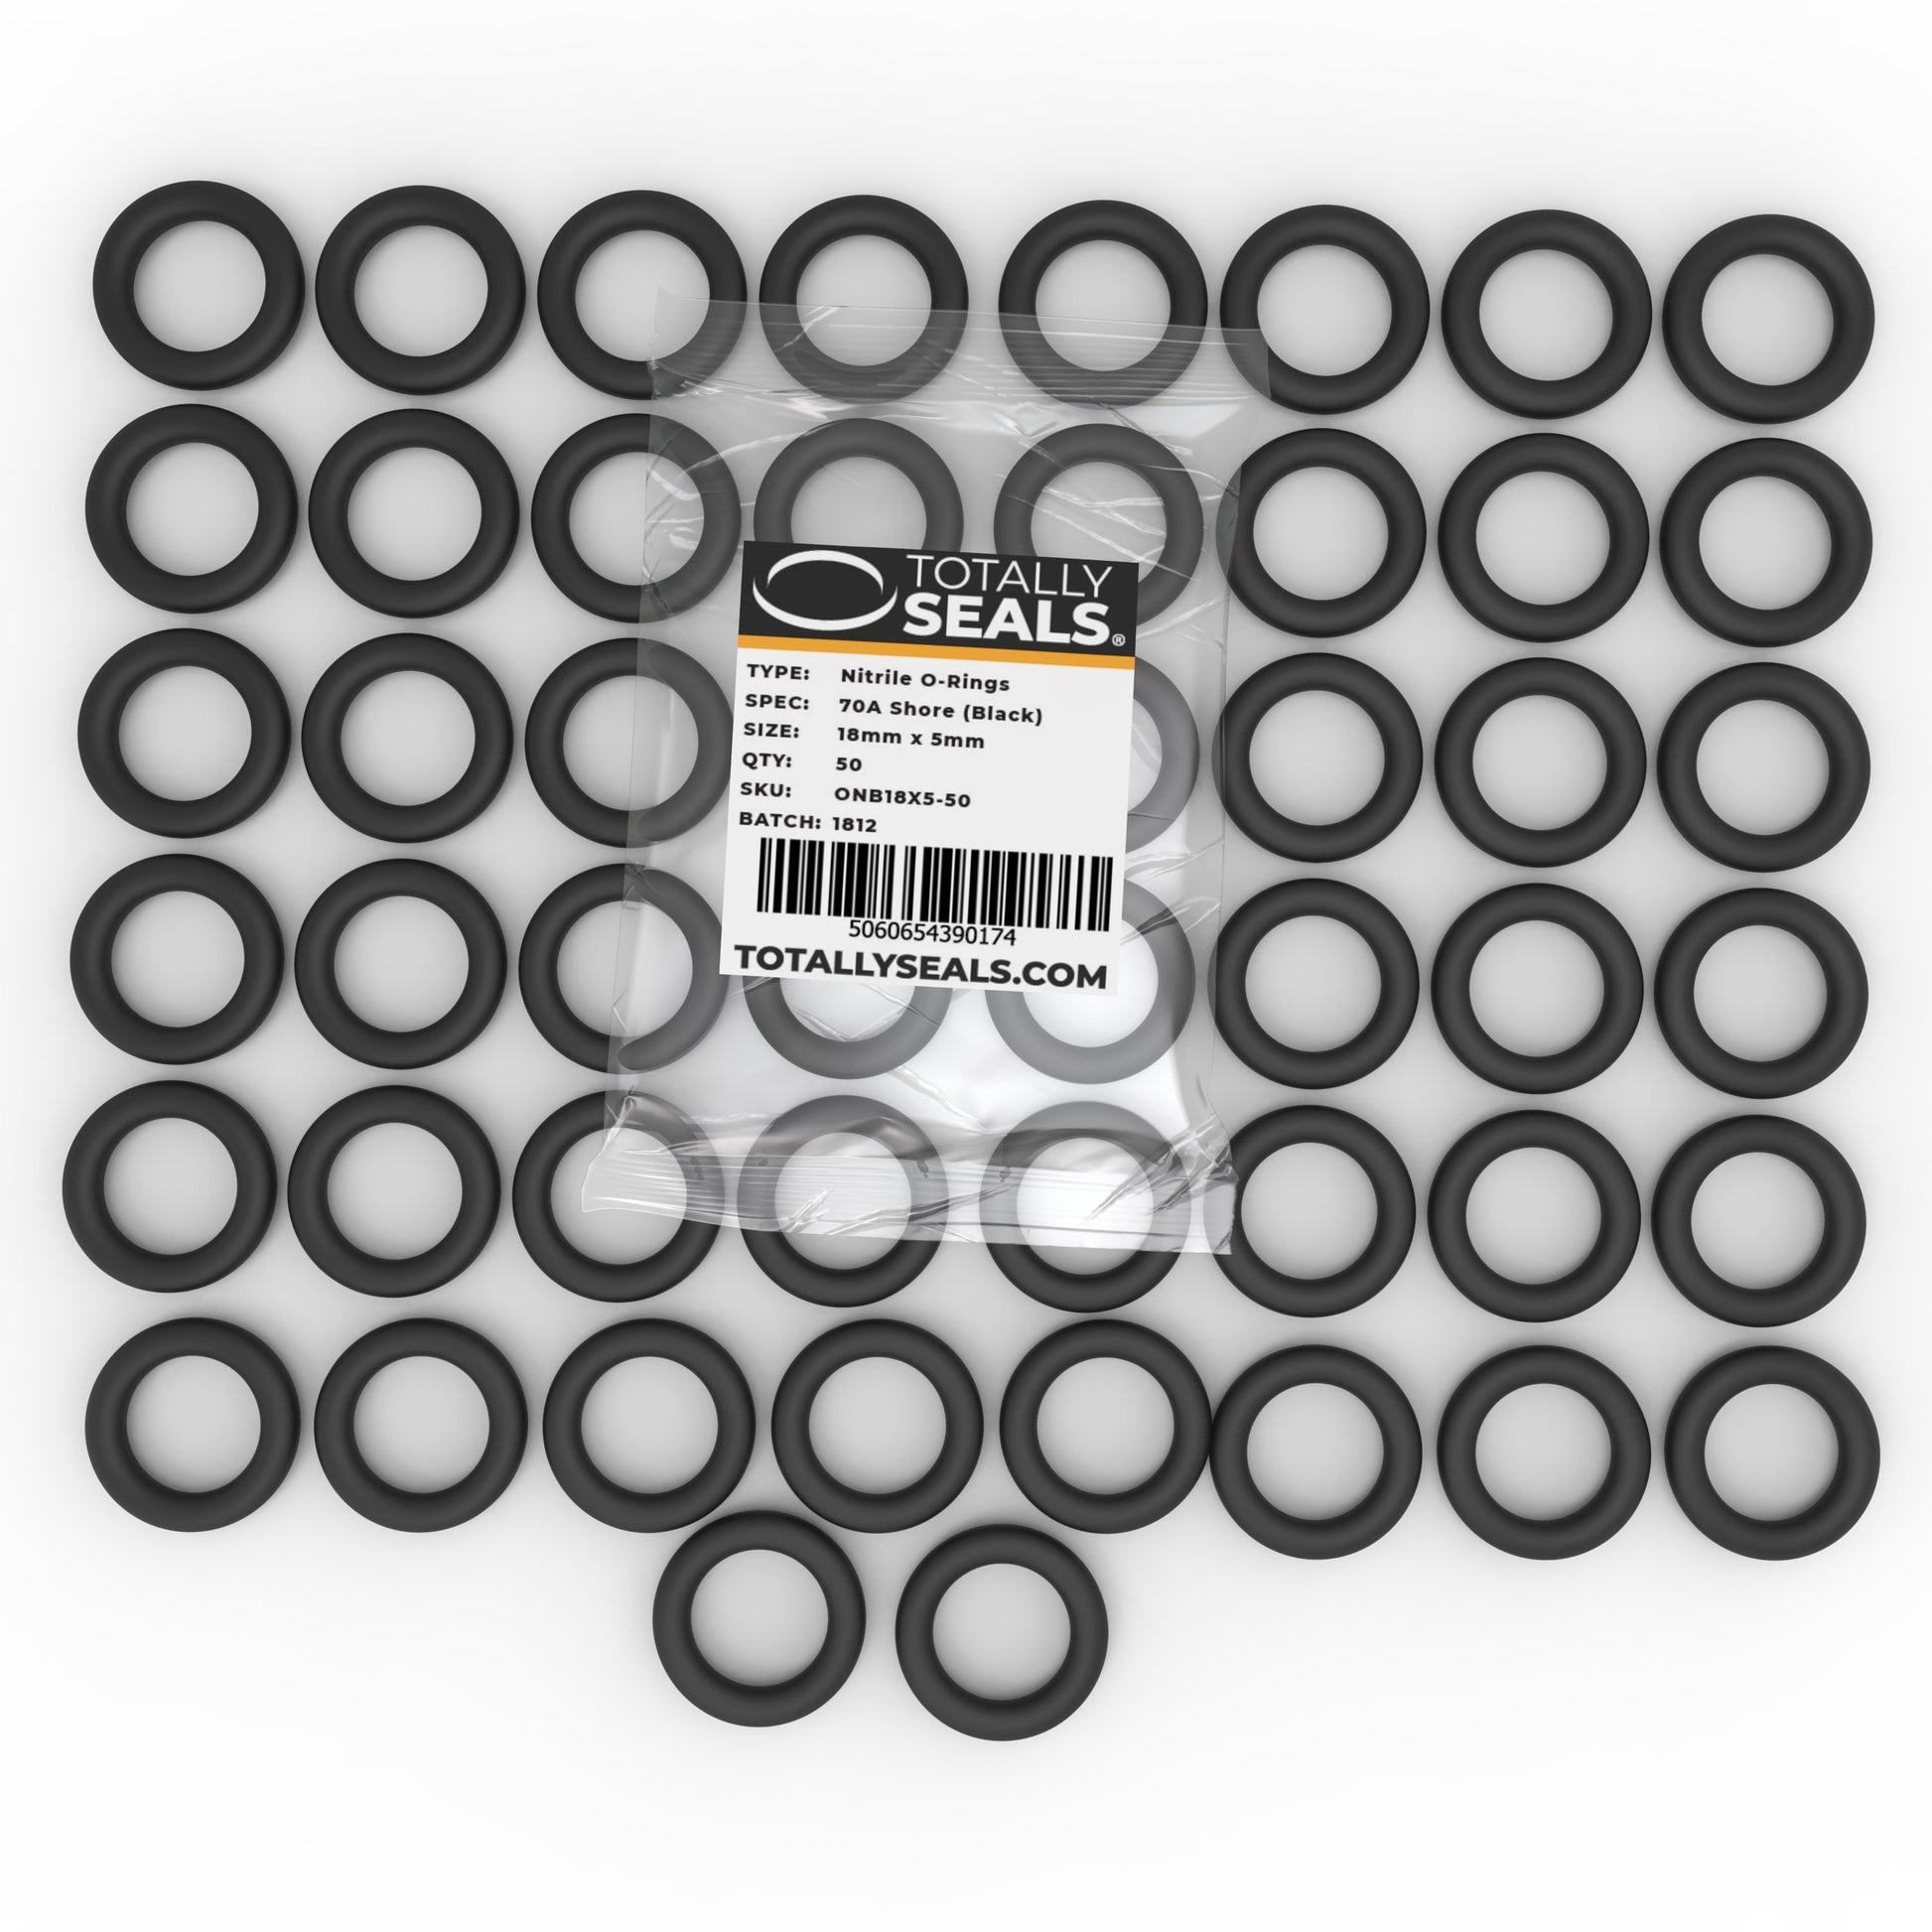 18mm x 5mm (28mm OD) Nitrile O-Rings - Totally Seals®